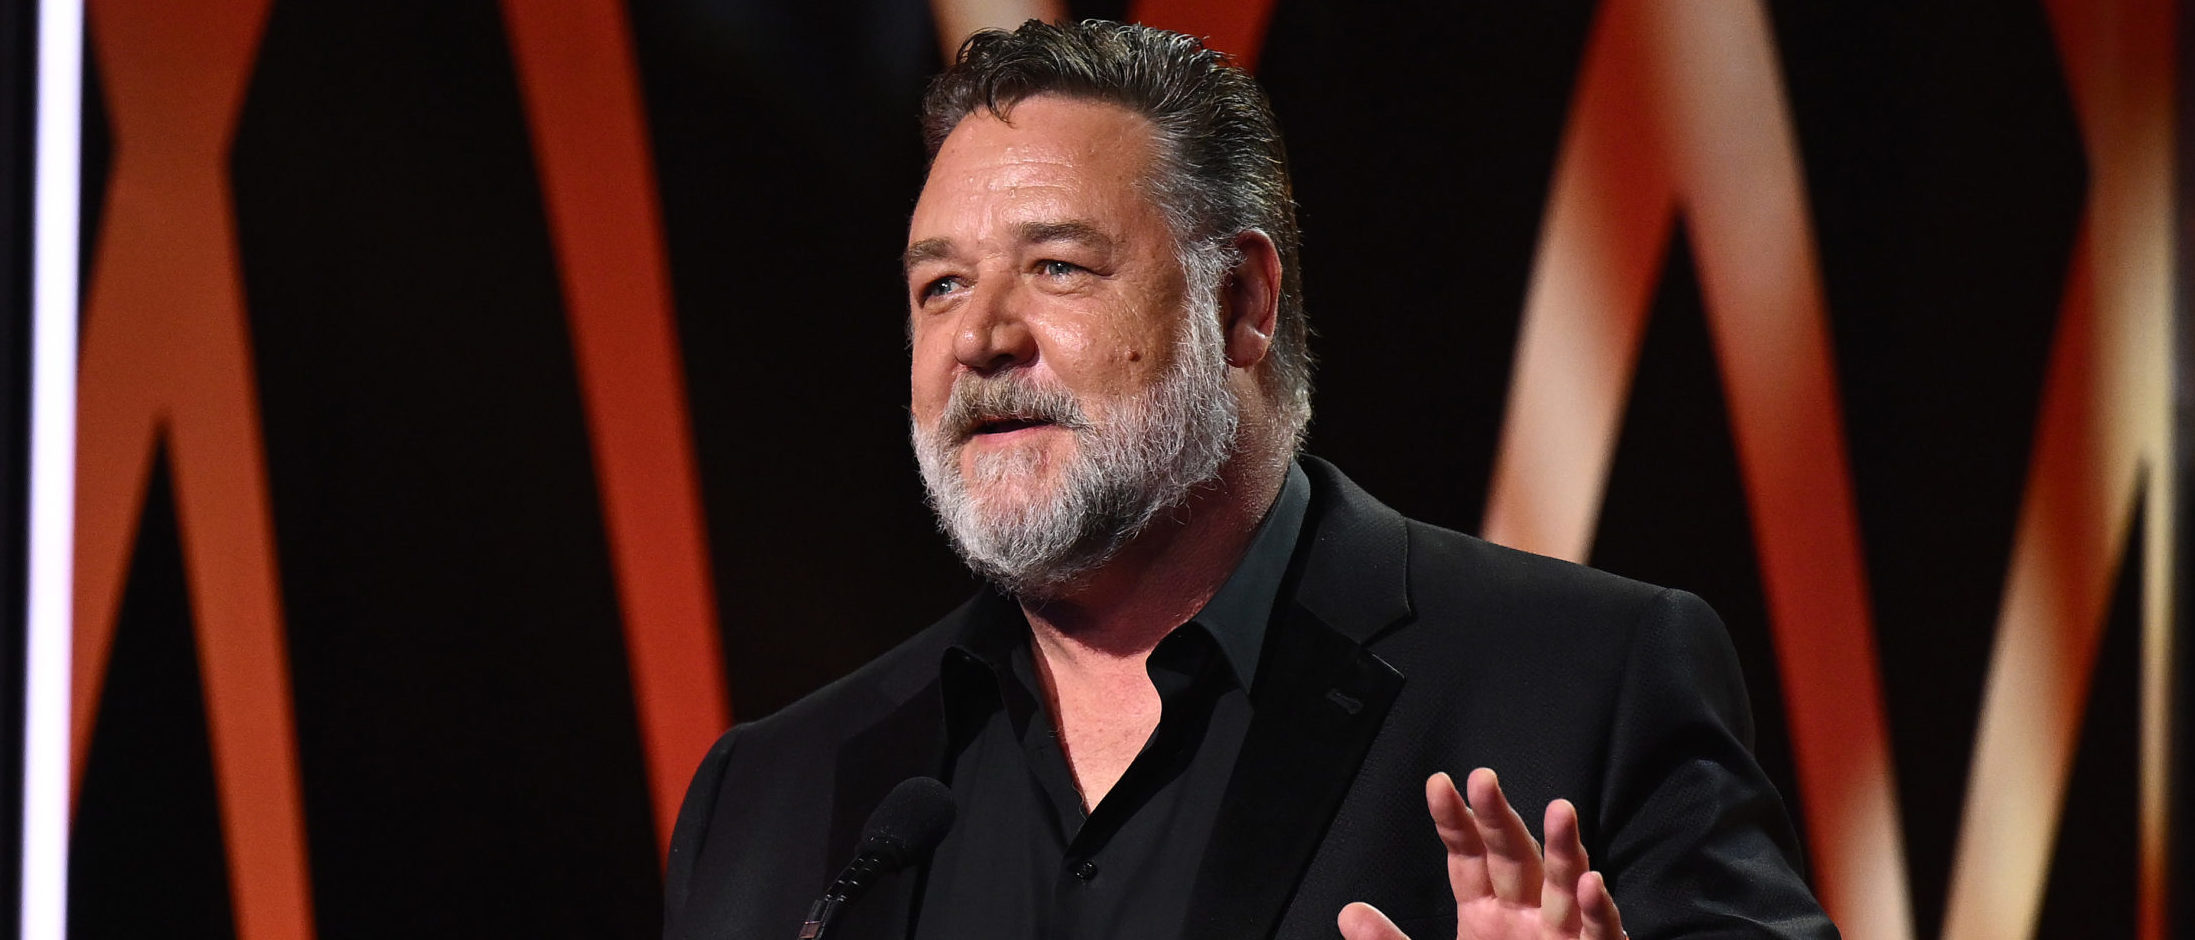 Russell Crowe Reveals He Suffered Severe Injury For Doing His Own Stunts